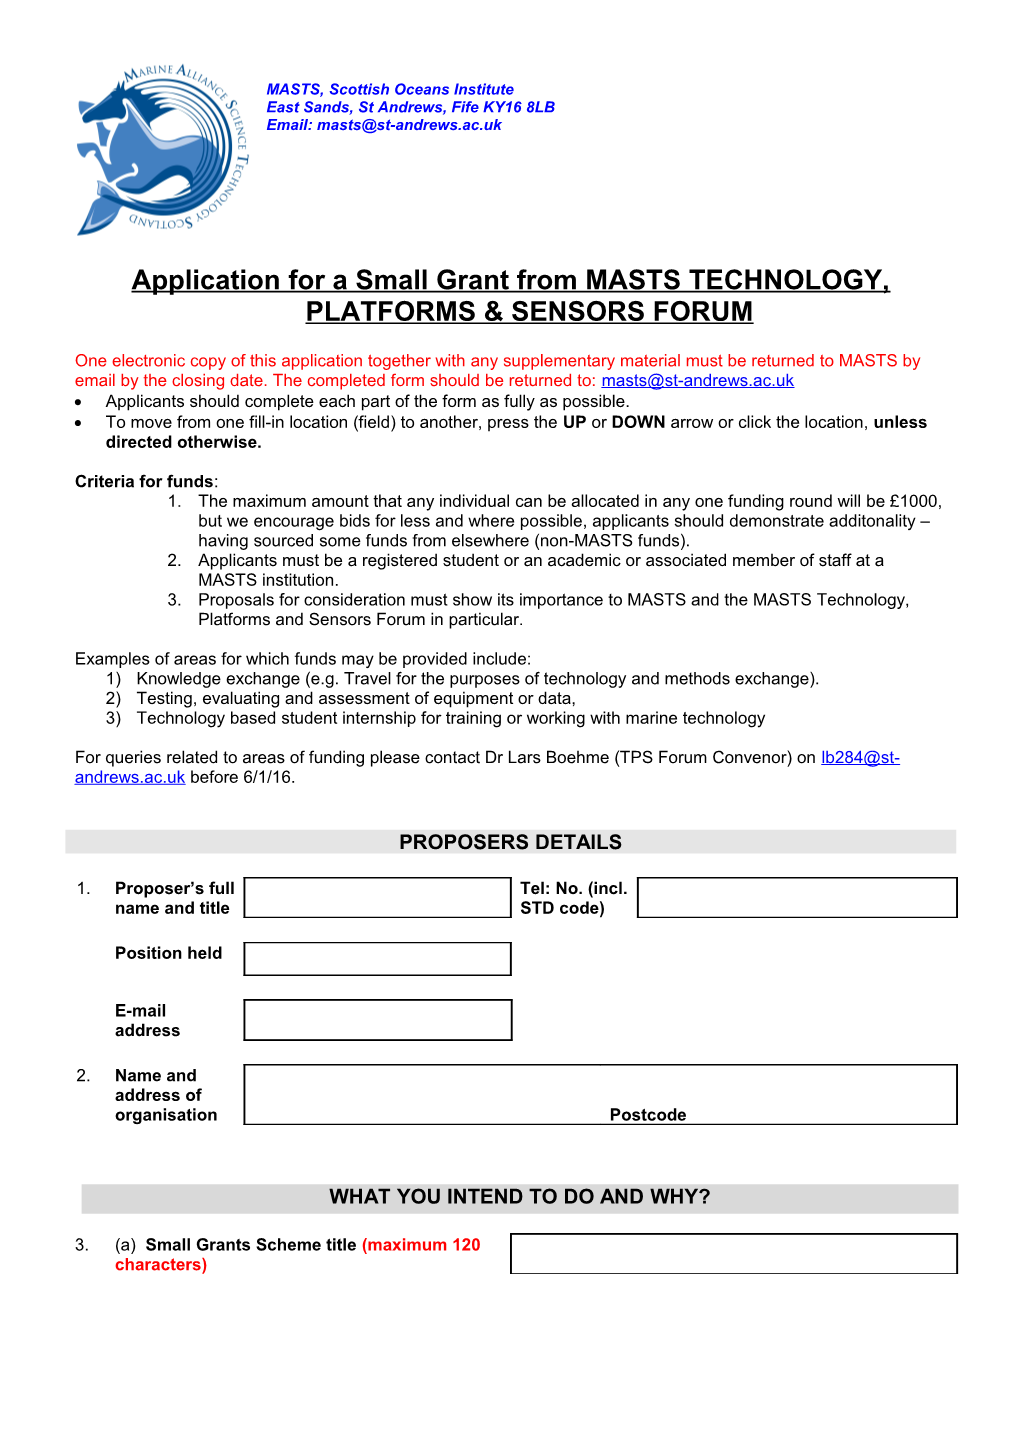 Application for a Small Grant from MASTSTECHNOLOGY, PLATFORMS & SENSORS FORUM